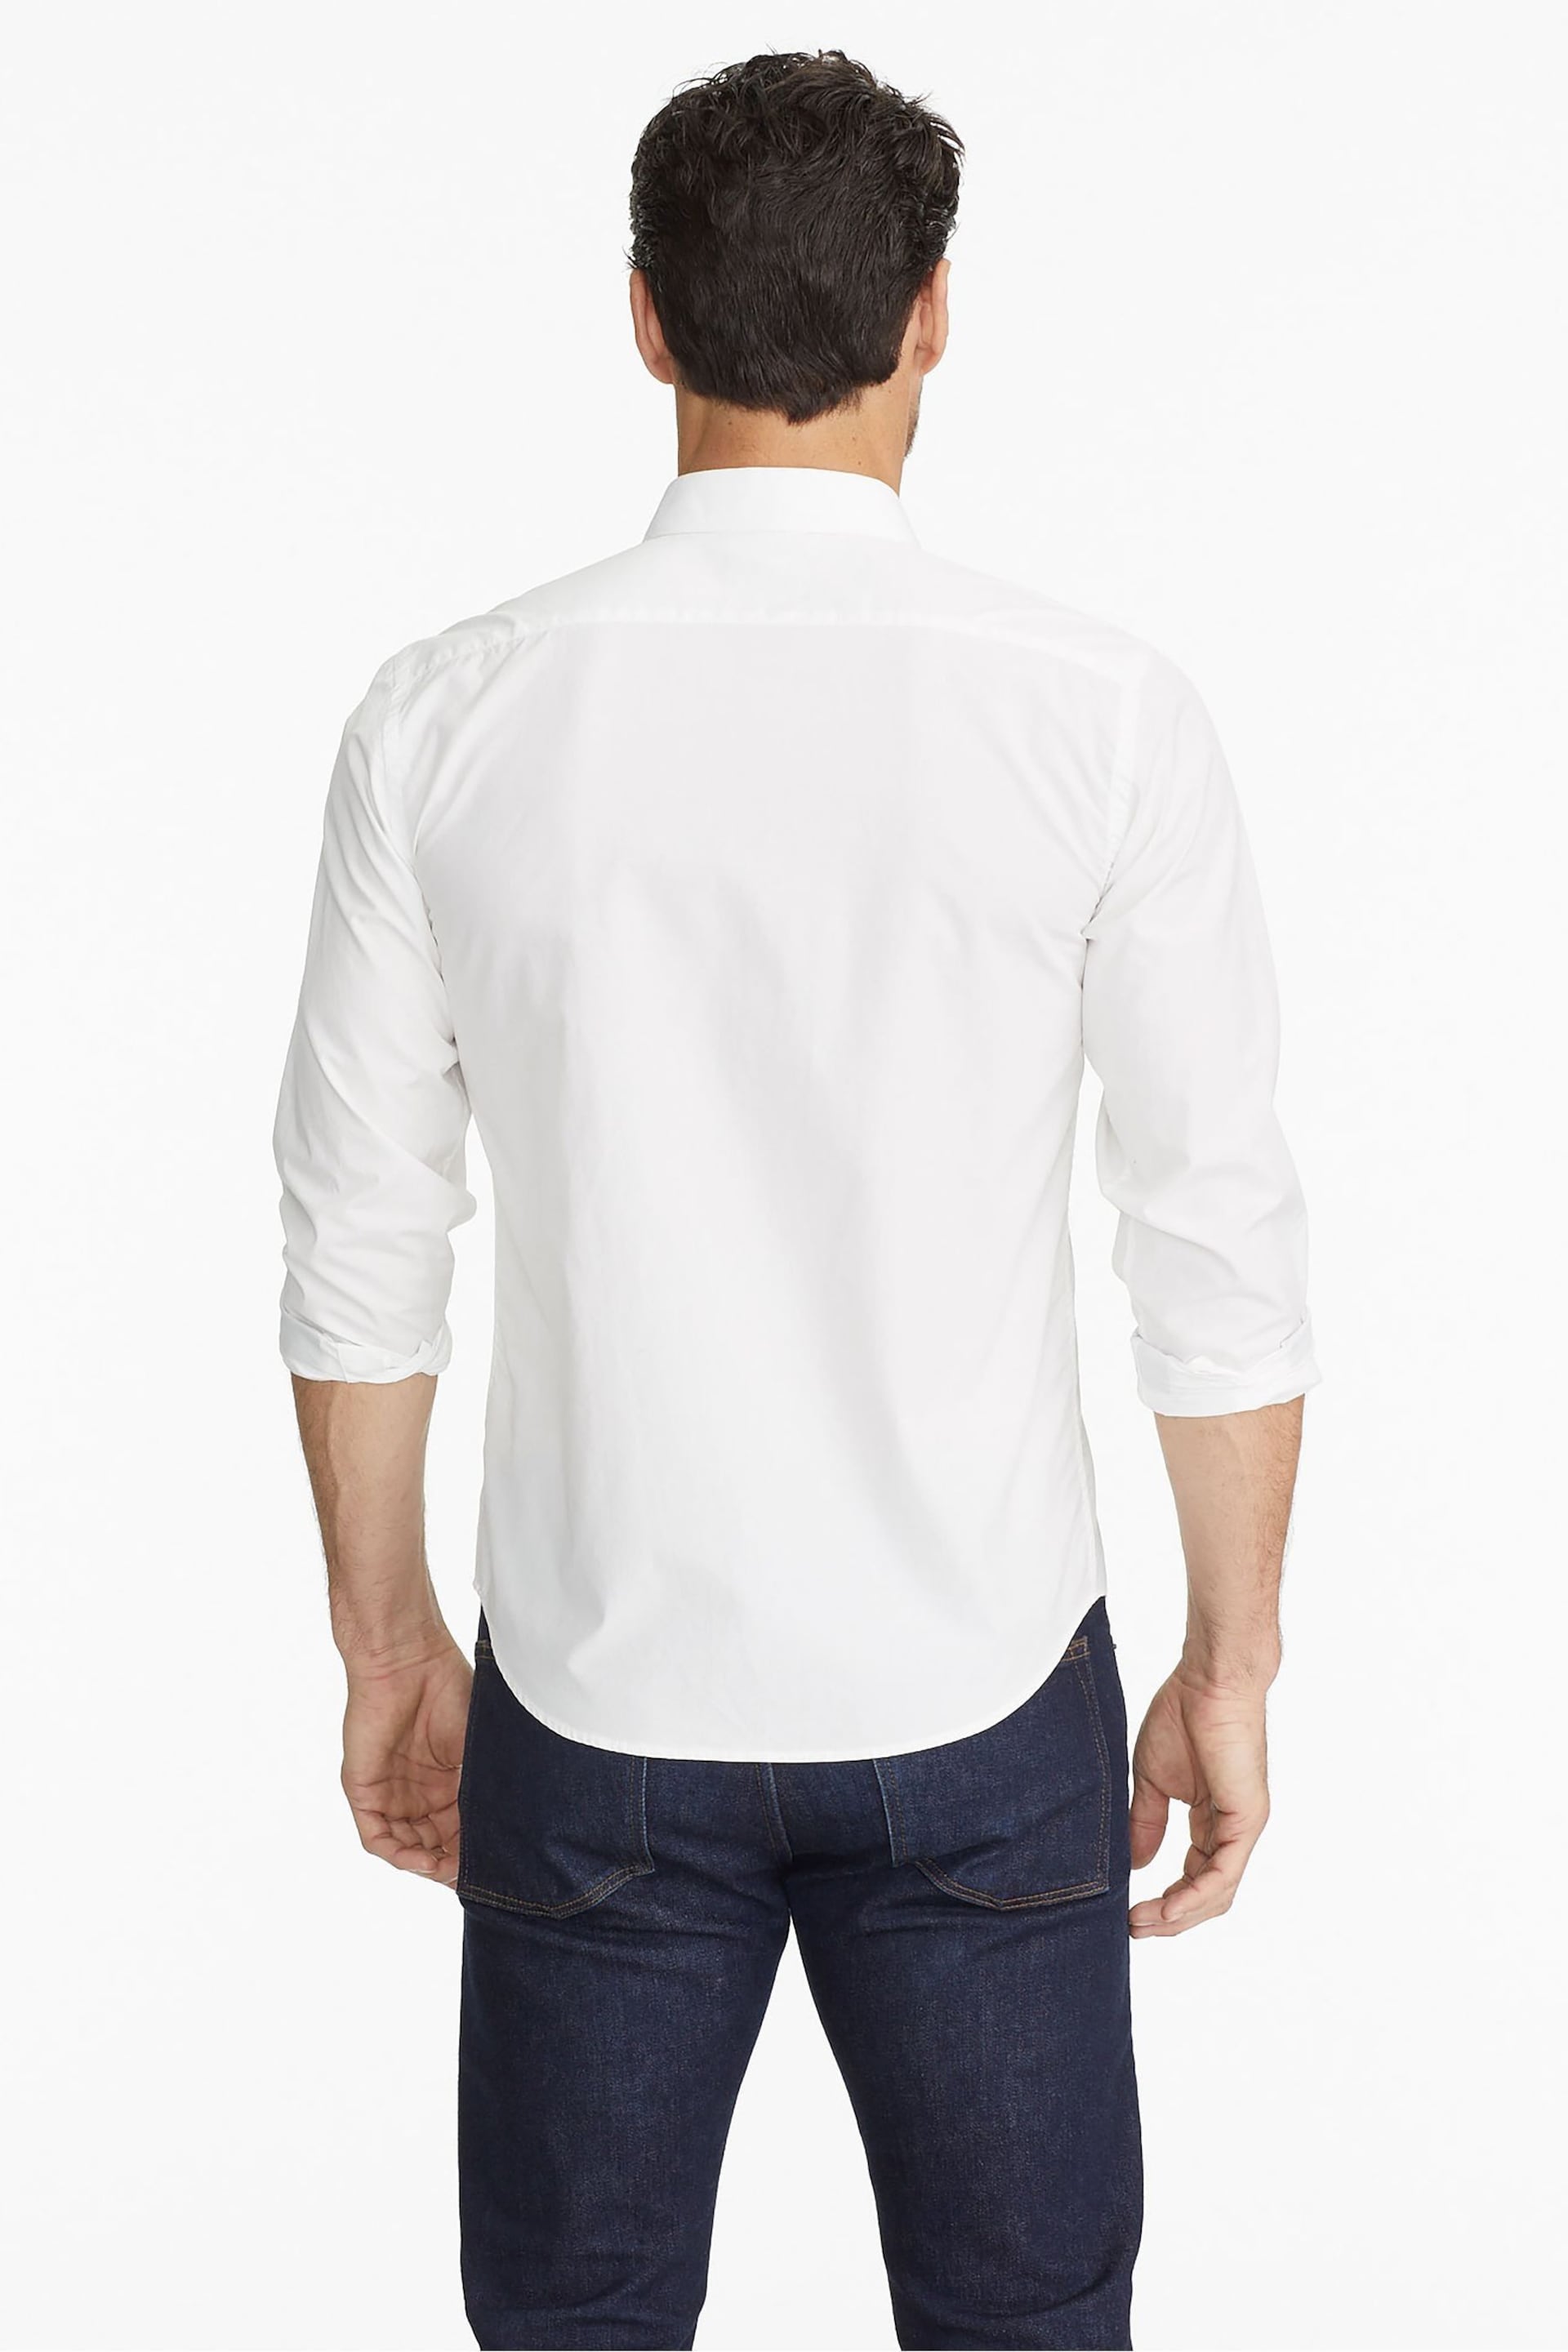 UNTUCKit White/Blue Wrinkle-Free Relaxed Fit Las Cases Special Shirt - Image 2 of 4